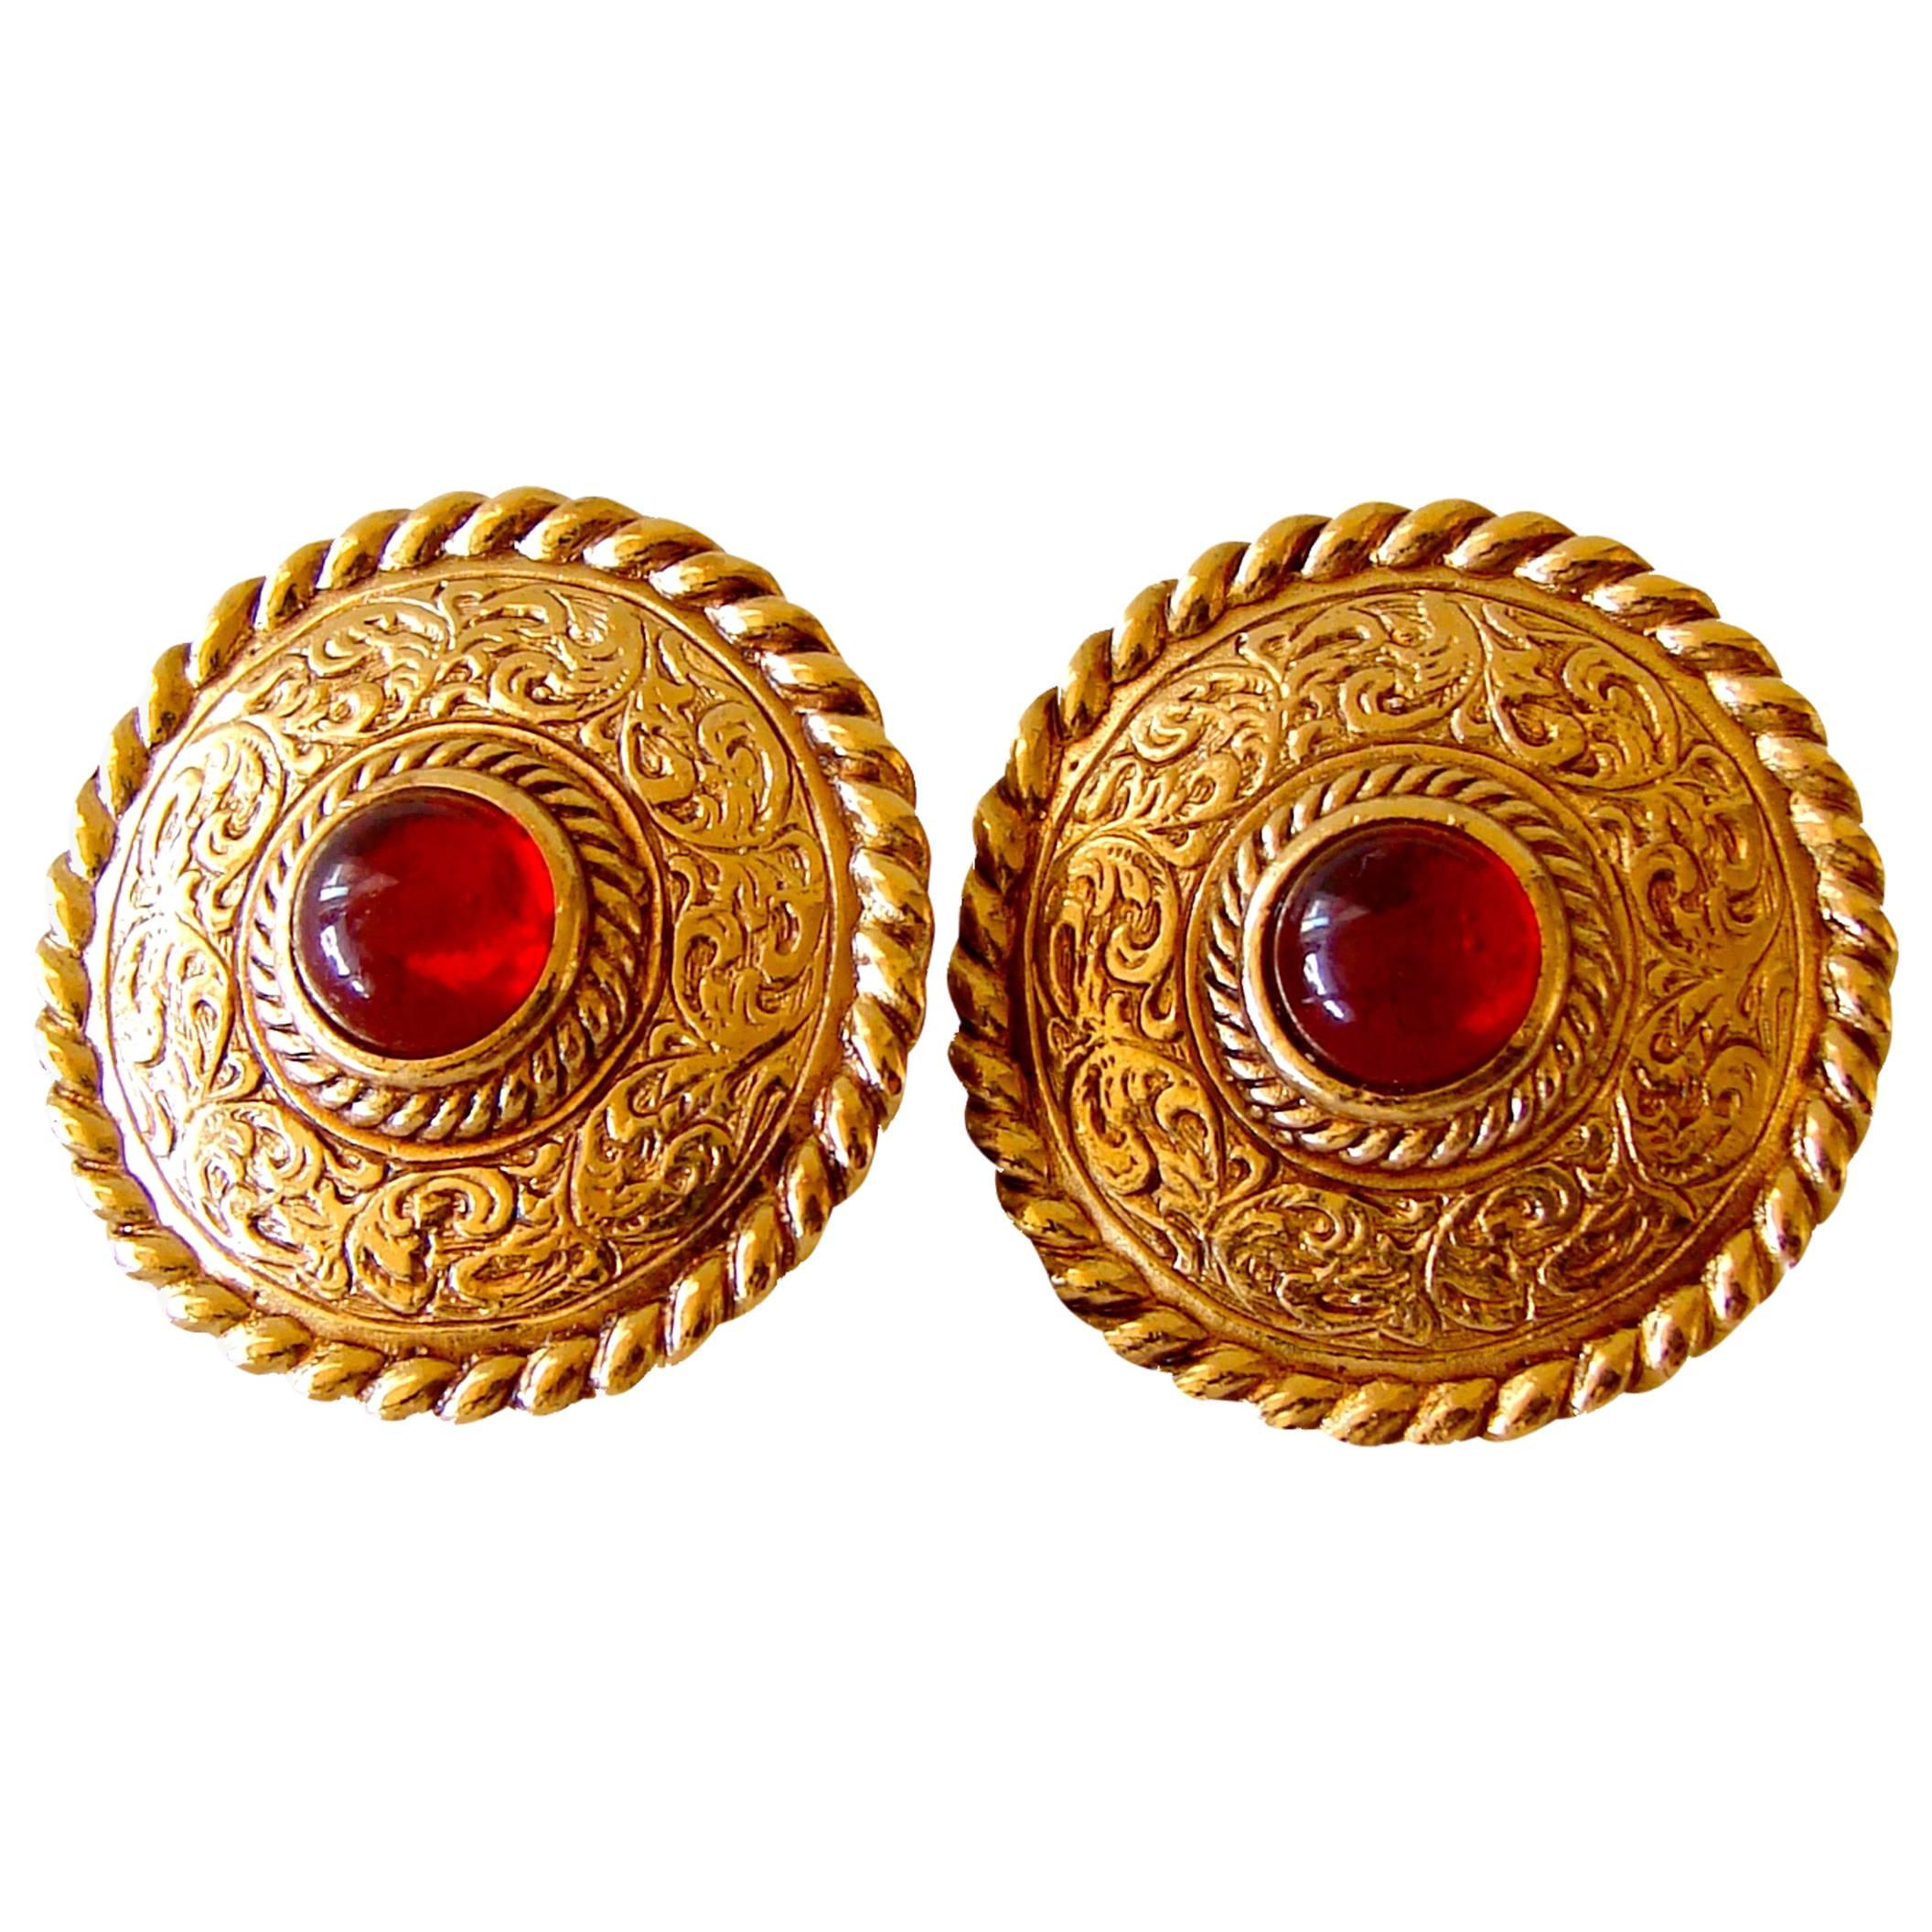 Givenchy Etruscan Earrings Red Glass Cabochon Clip Style 1970s